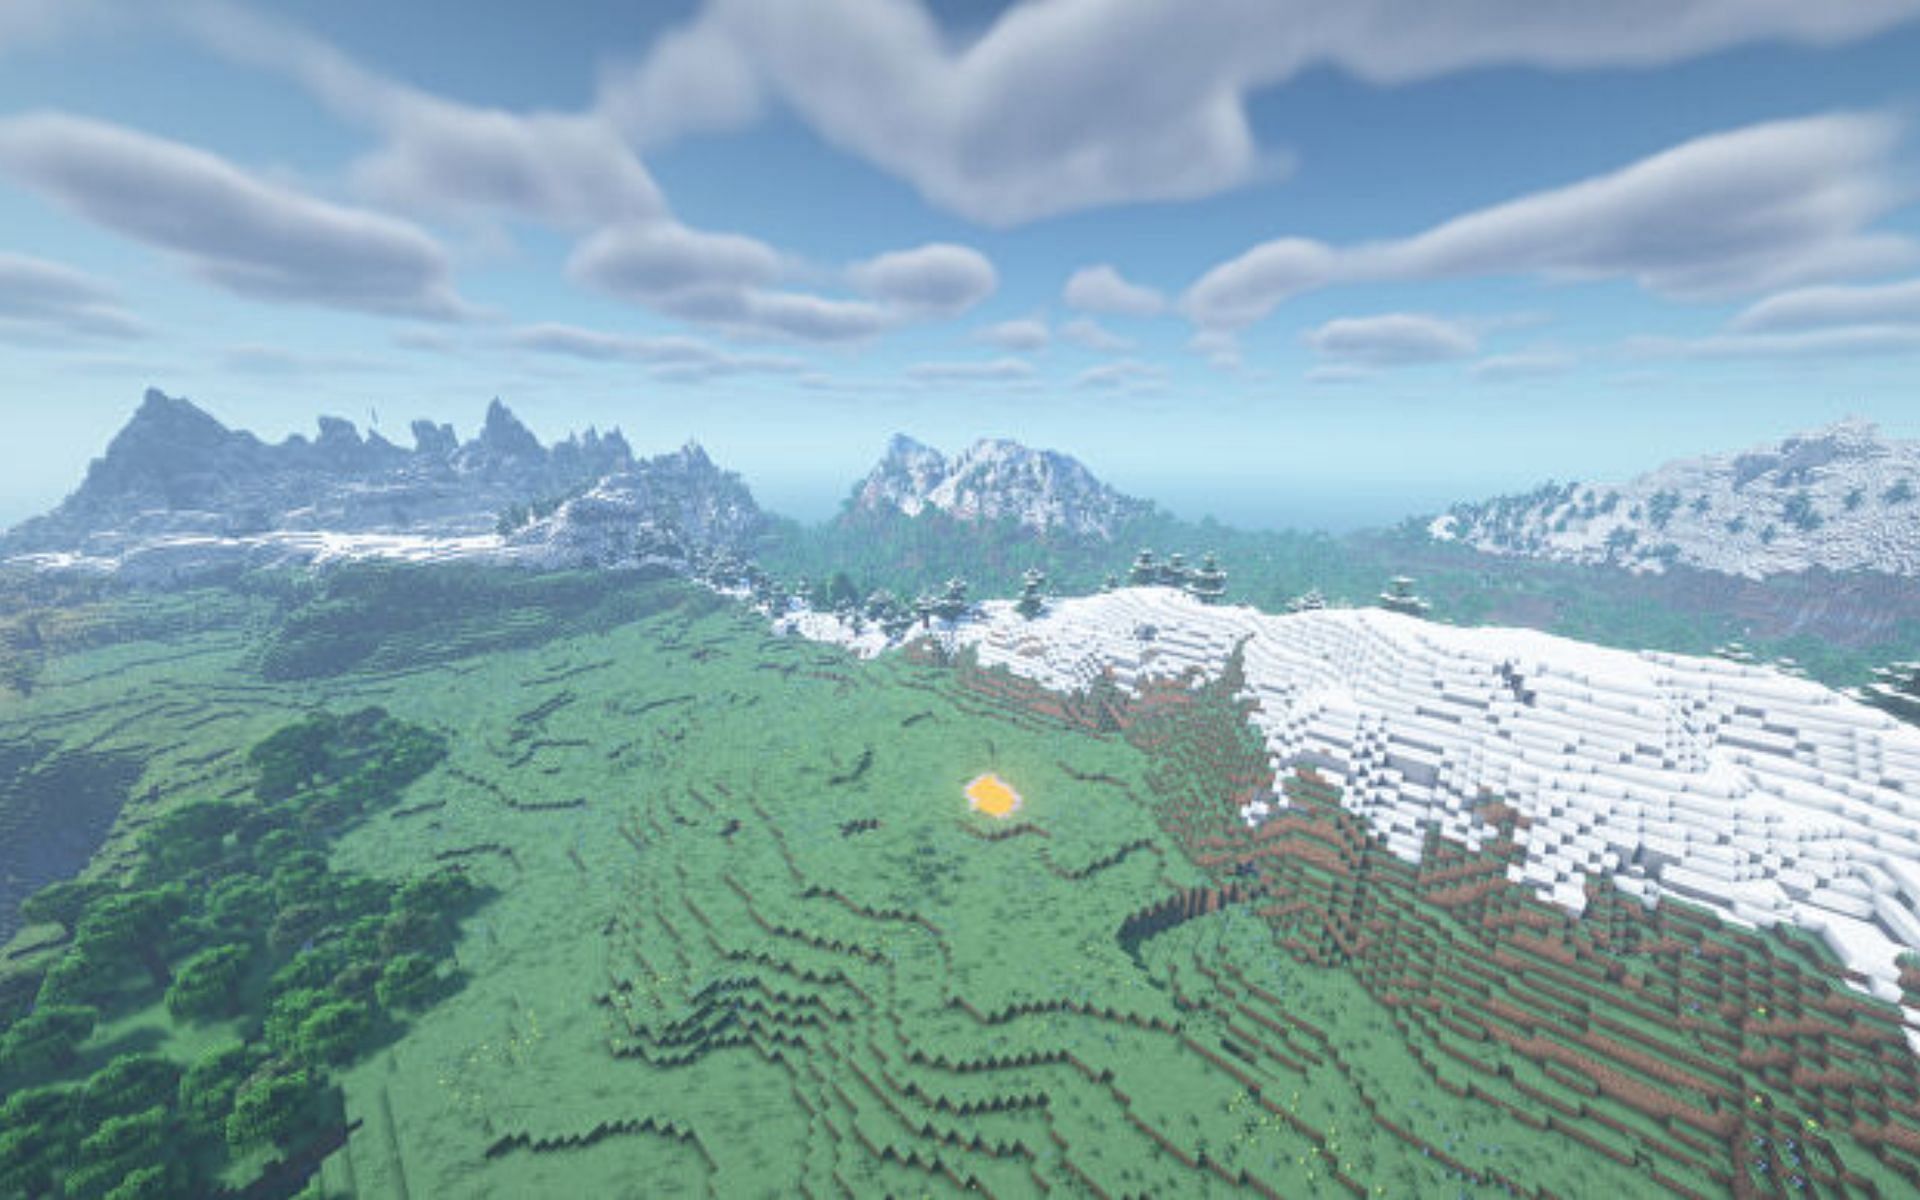 The Mountain range and hills&#039; seed (Image via Minecraft)